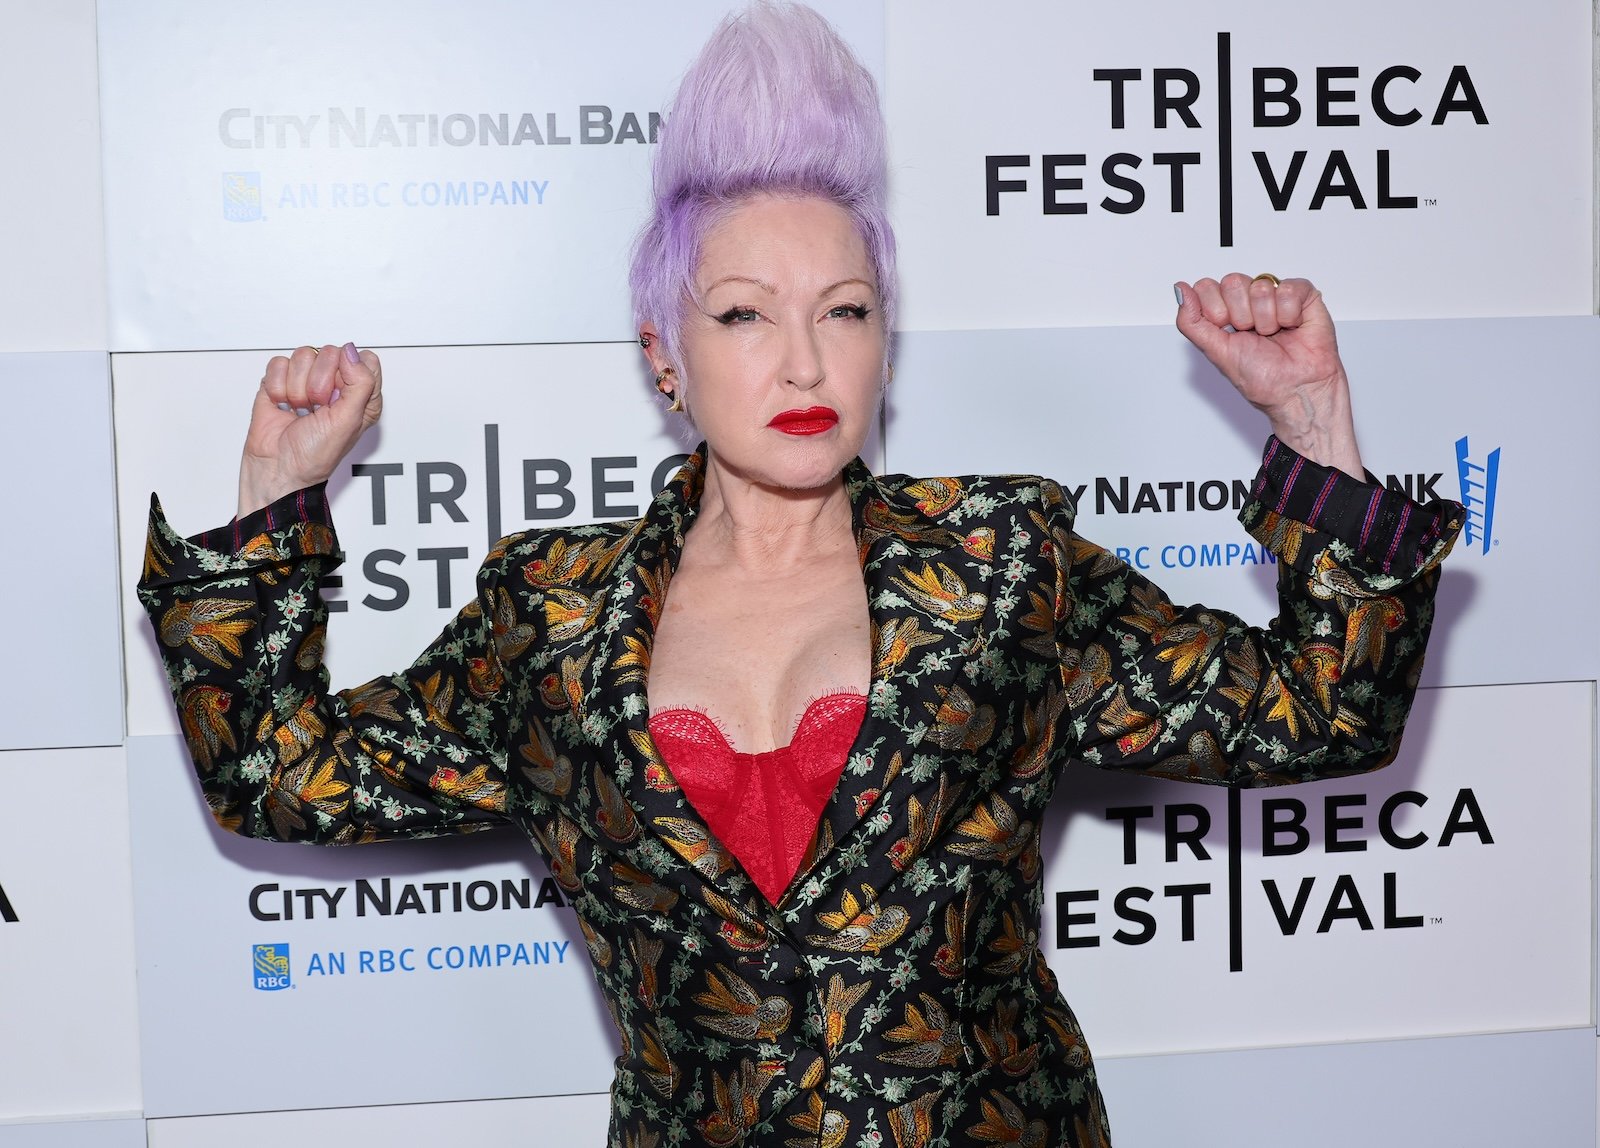 Cyndi Lauper Wants To Have Fun On Tour Once More Before Retiring